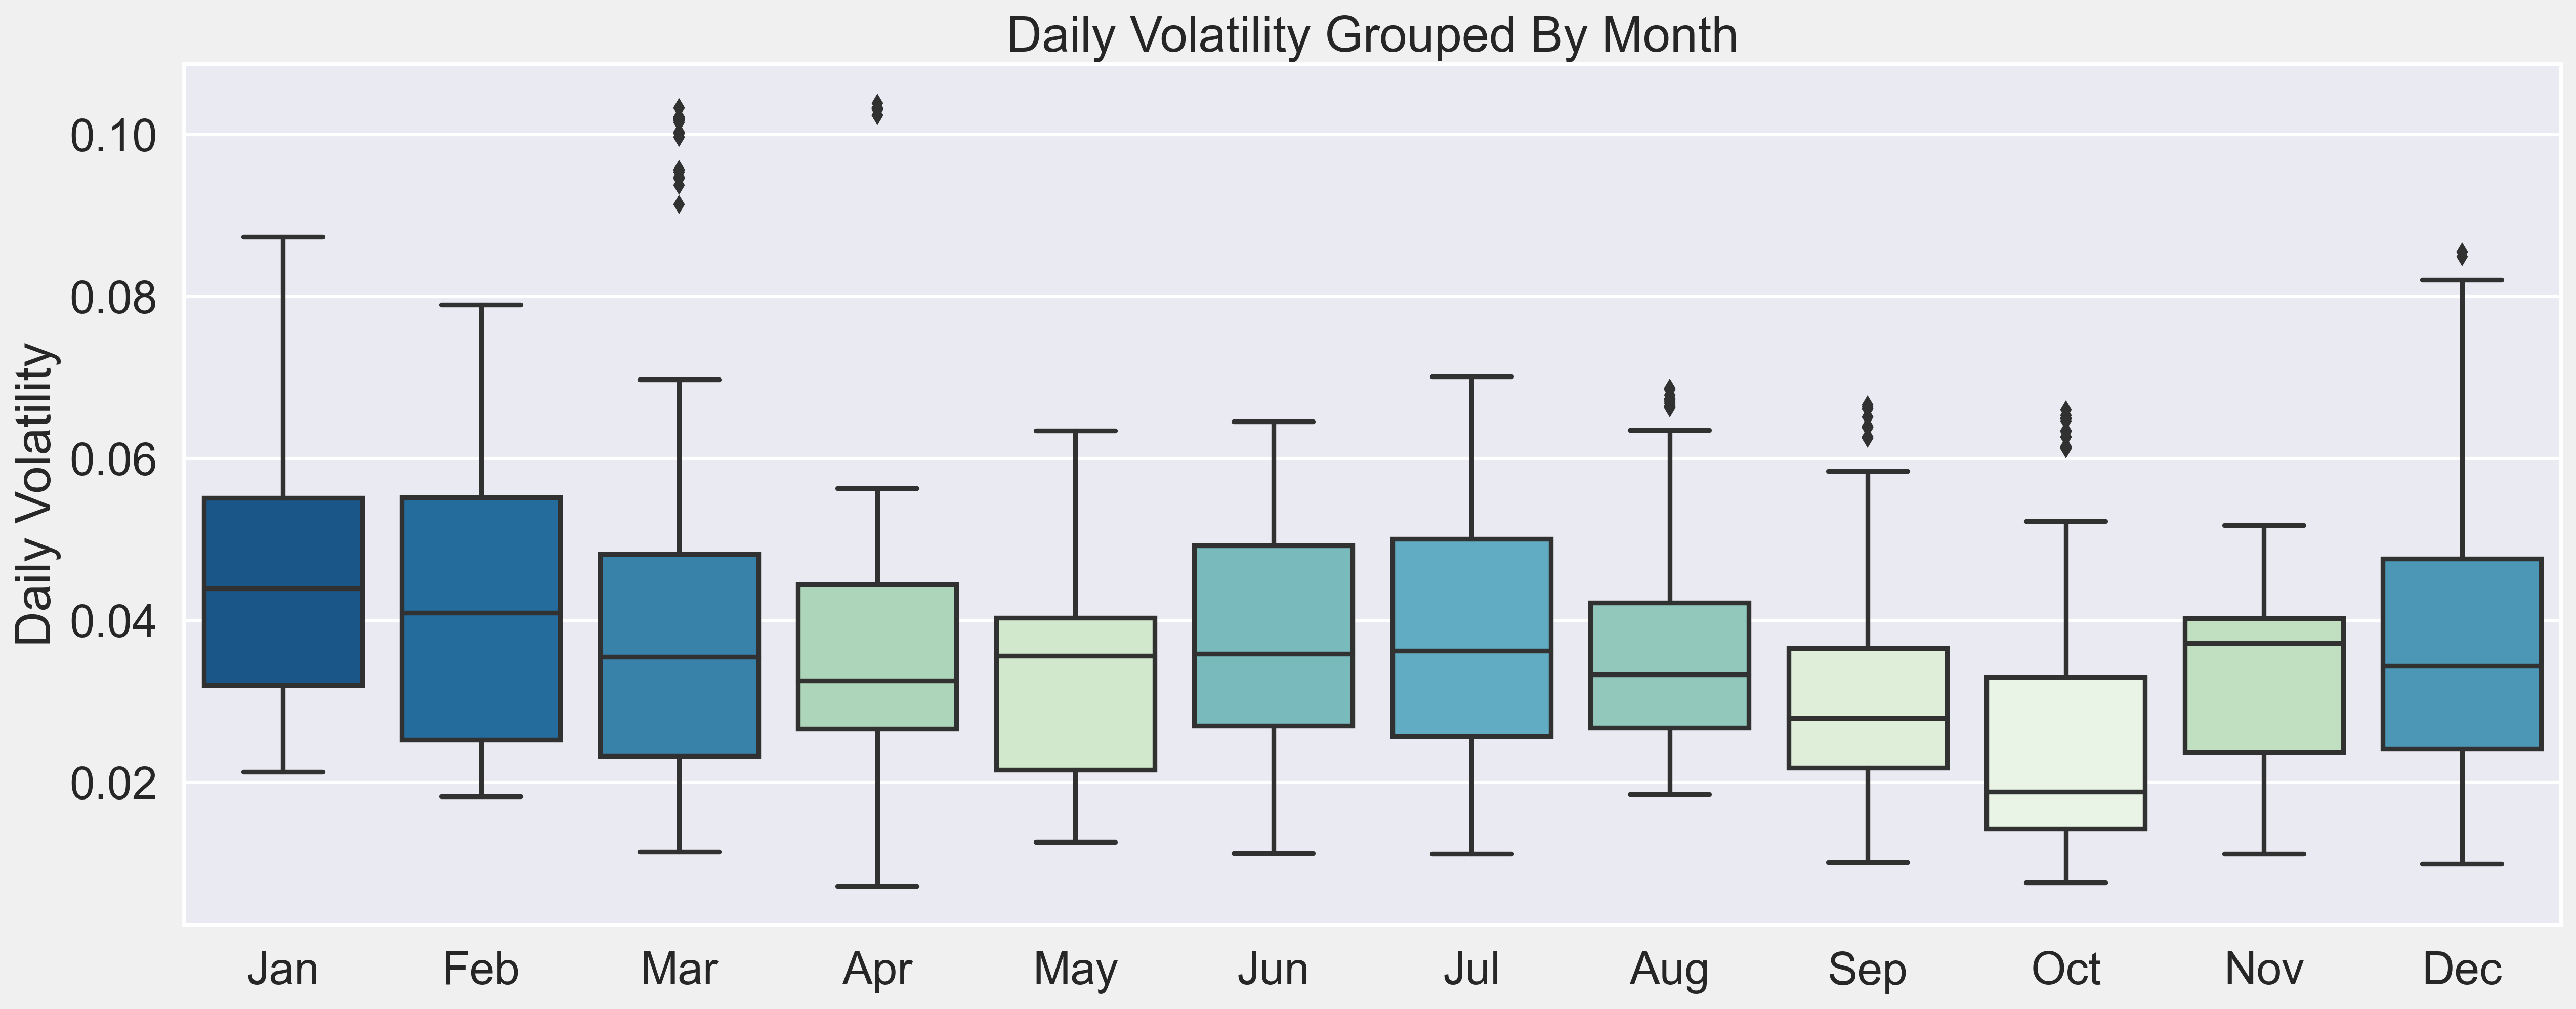 Daily Volatility Grouped by Month